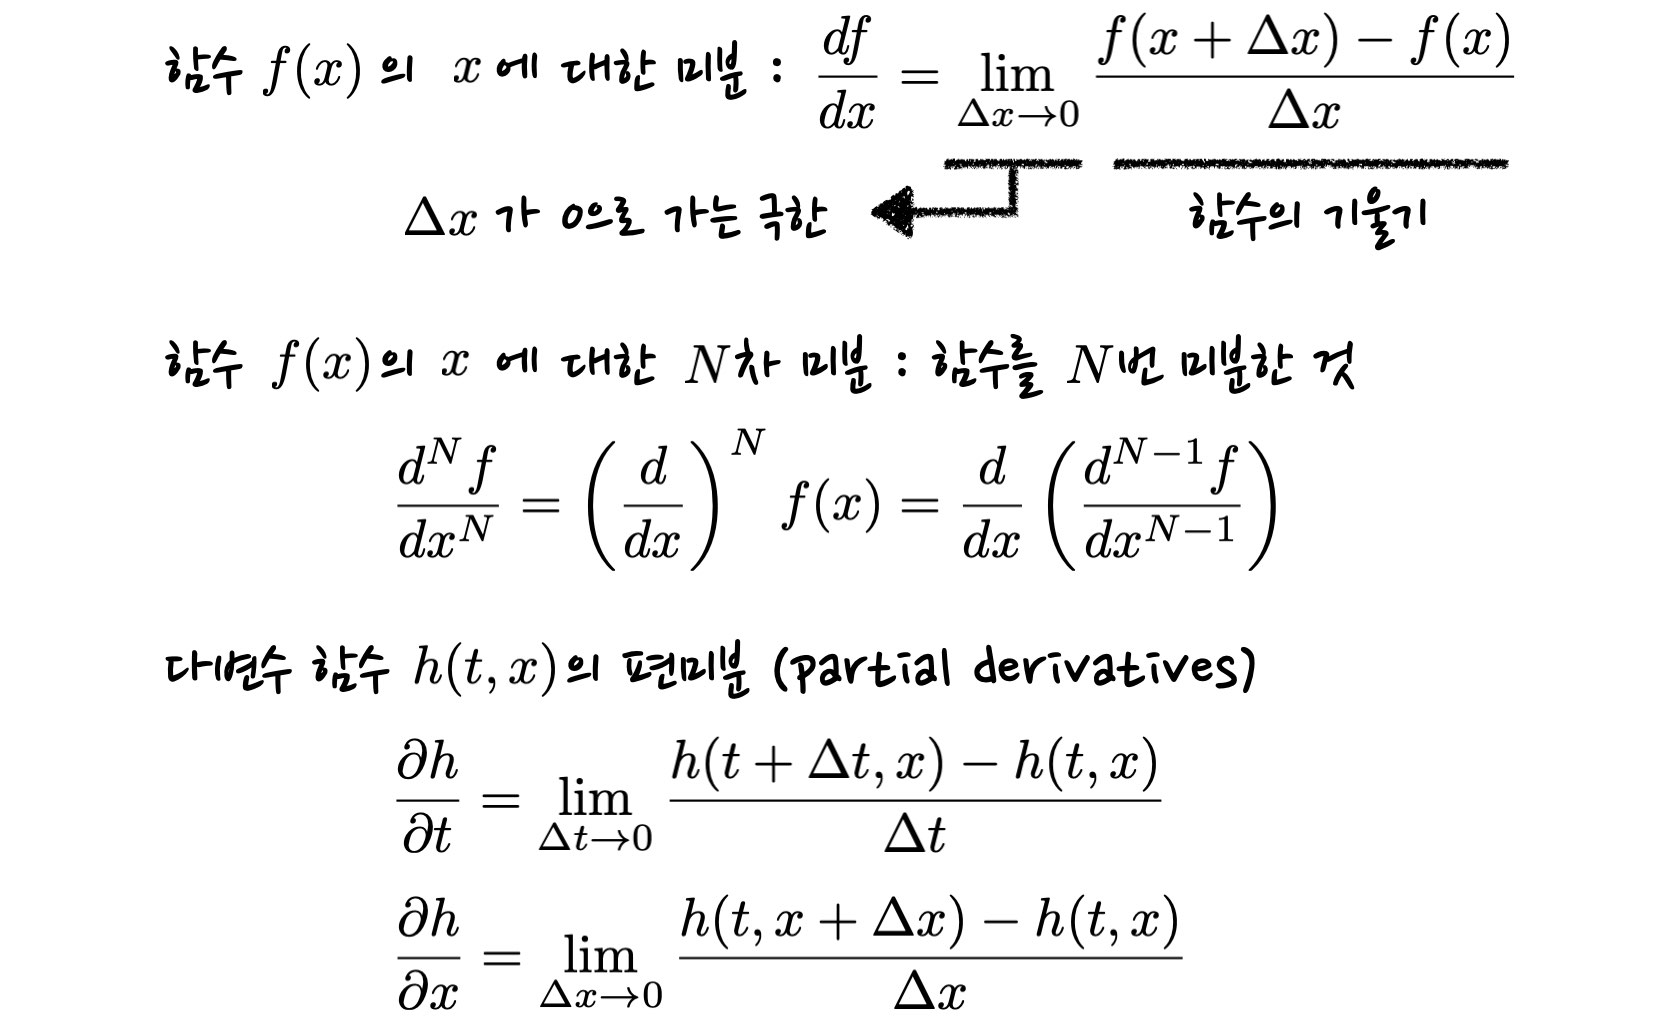 equation for definition of ordinary and partial derivatives